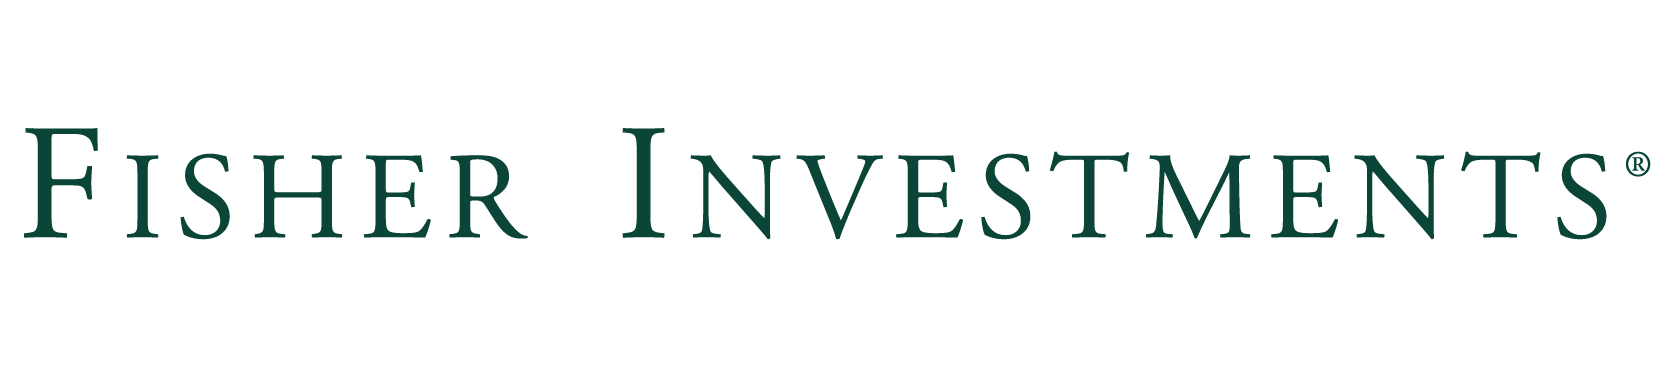 Fisher Investments Company Logo